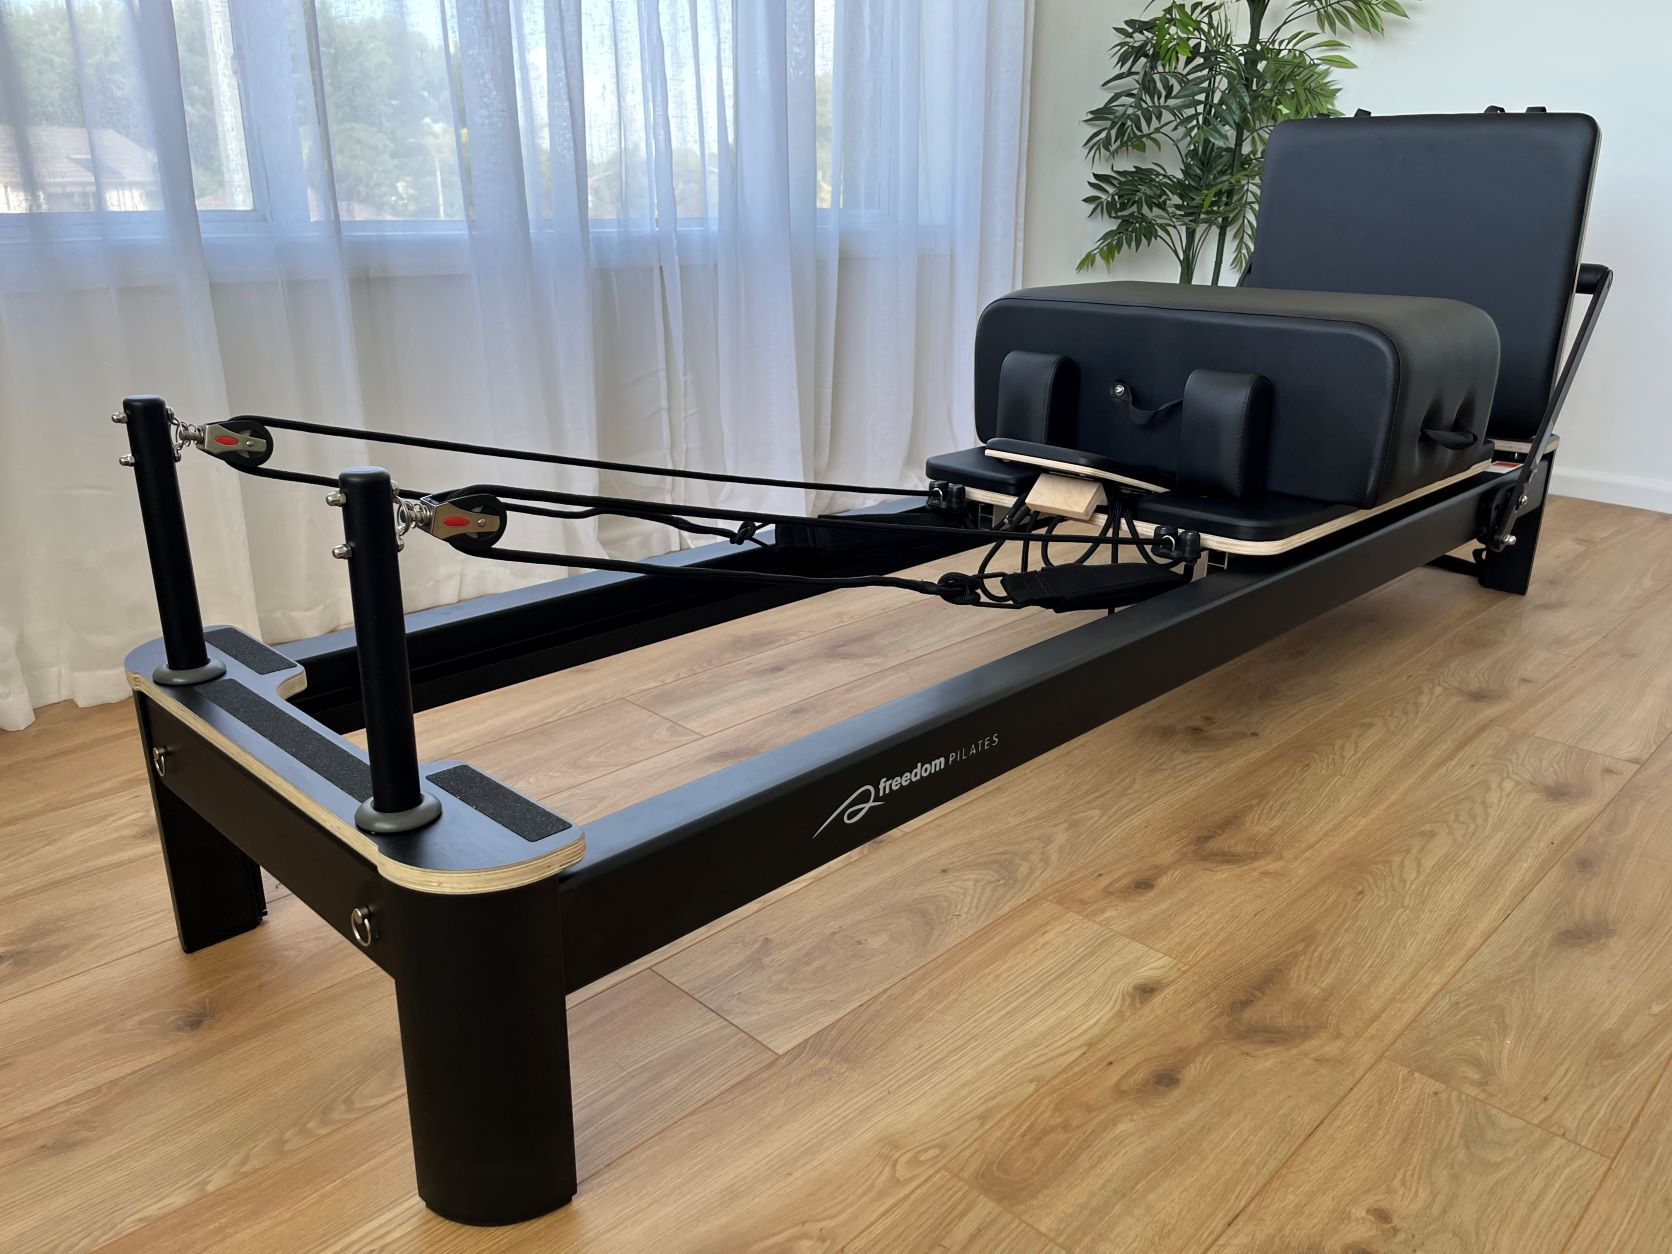 The Dream Pilates Reformer from Freedom Pilates - Order Now